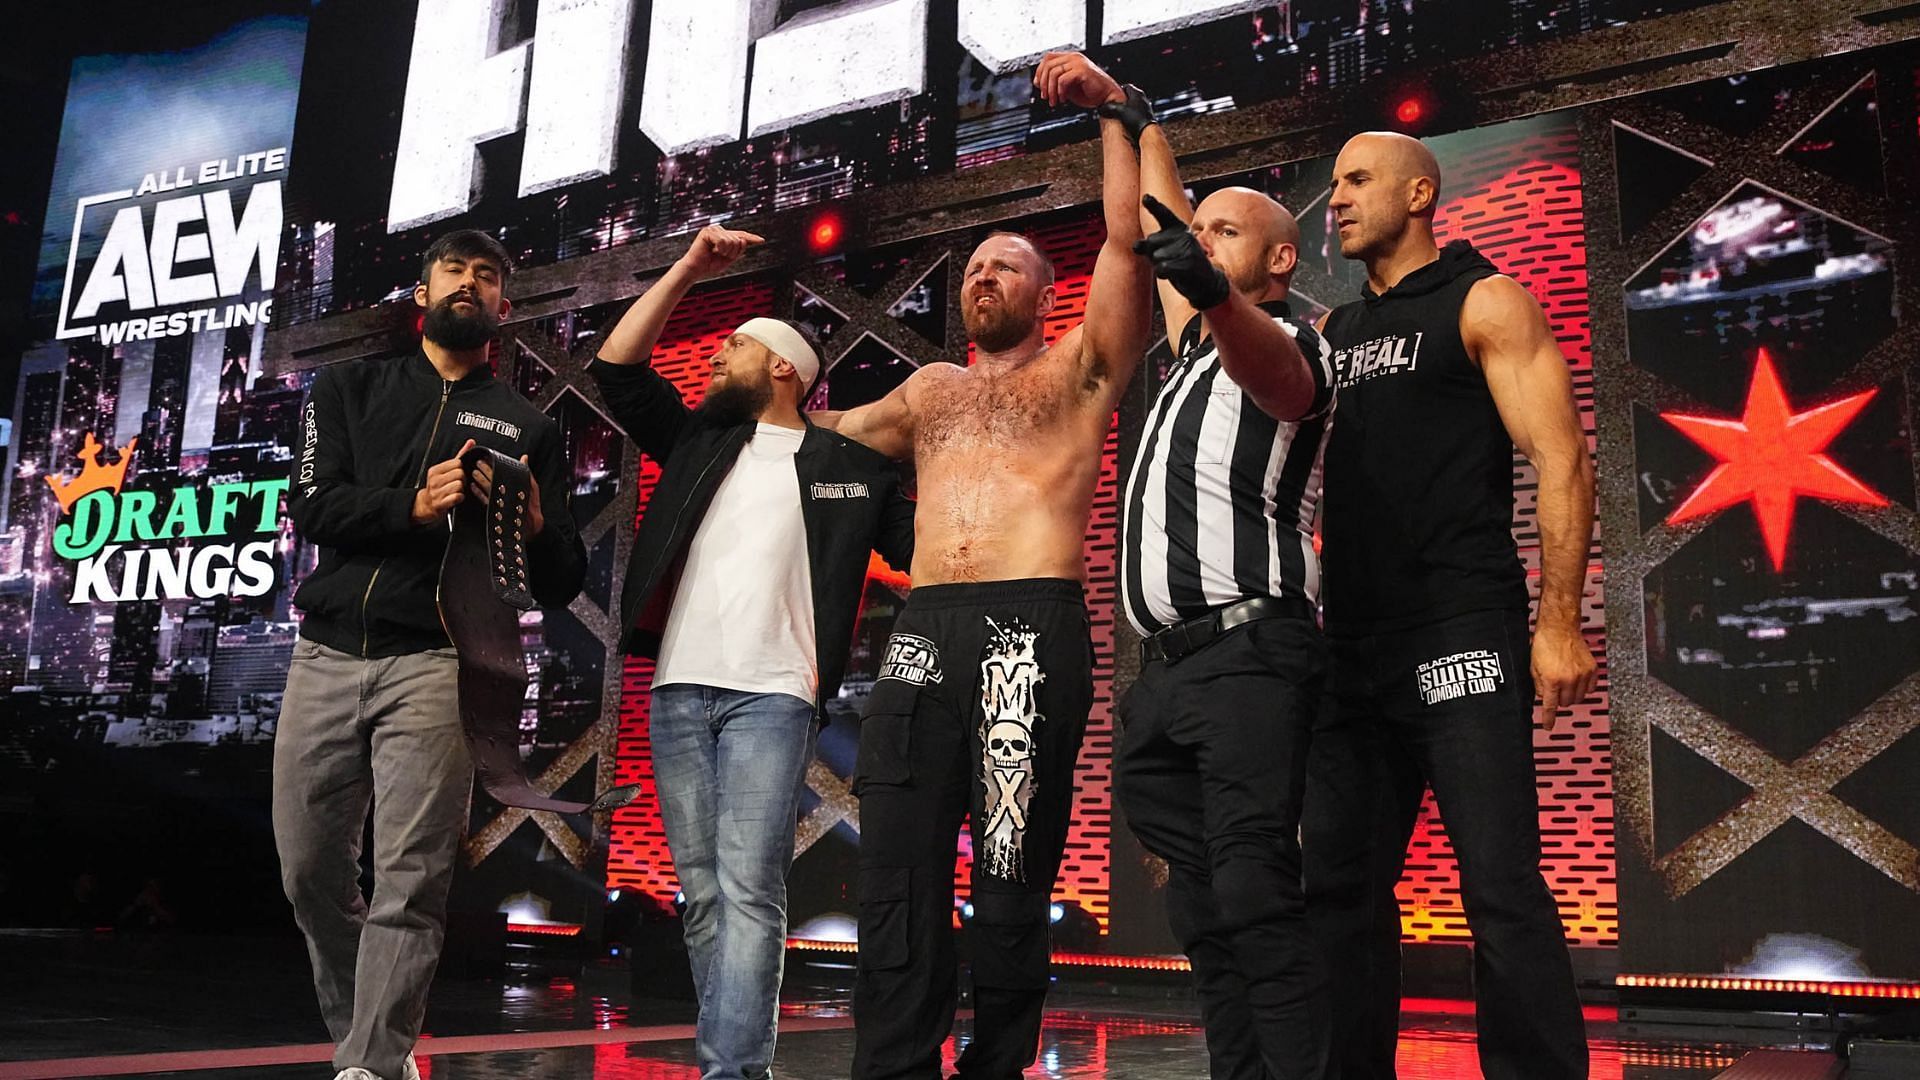 The Blackpool Combat Club is one of the top factions in AEW consisting of Jon Moxley, Bryan Danielson, Claudio Castagnoli, and Wheeler Yuta [Photo courtesy of AEW